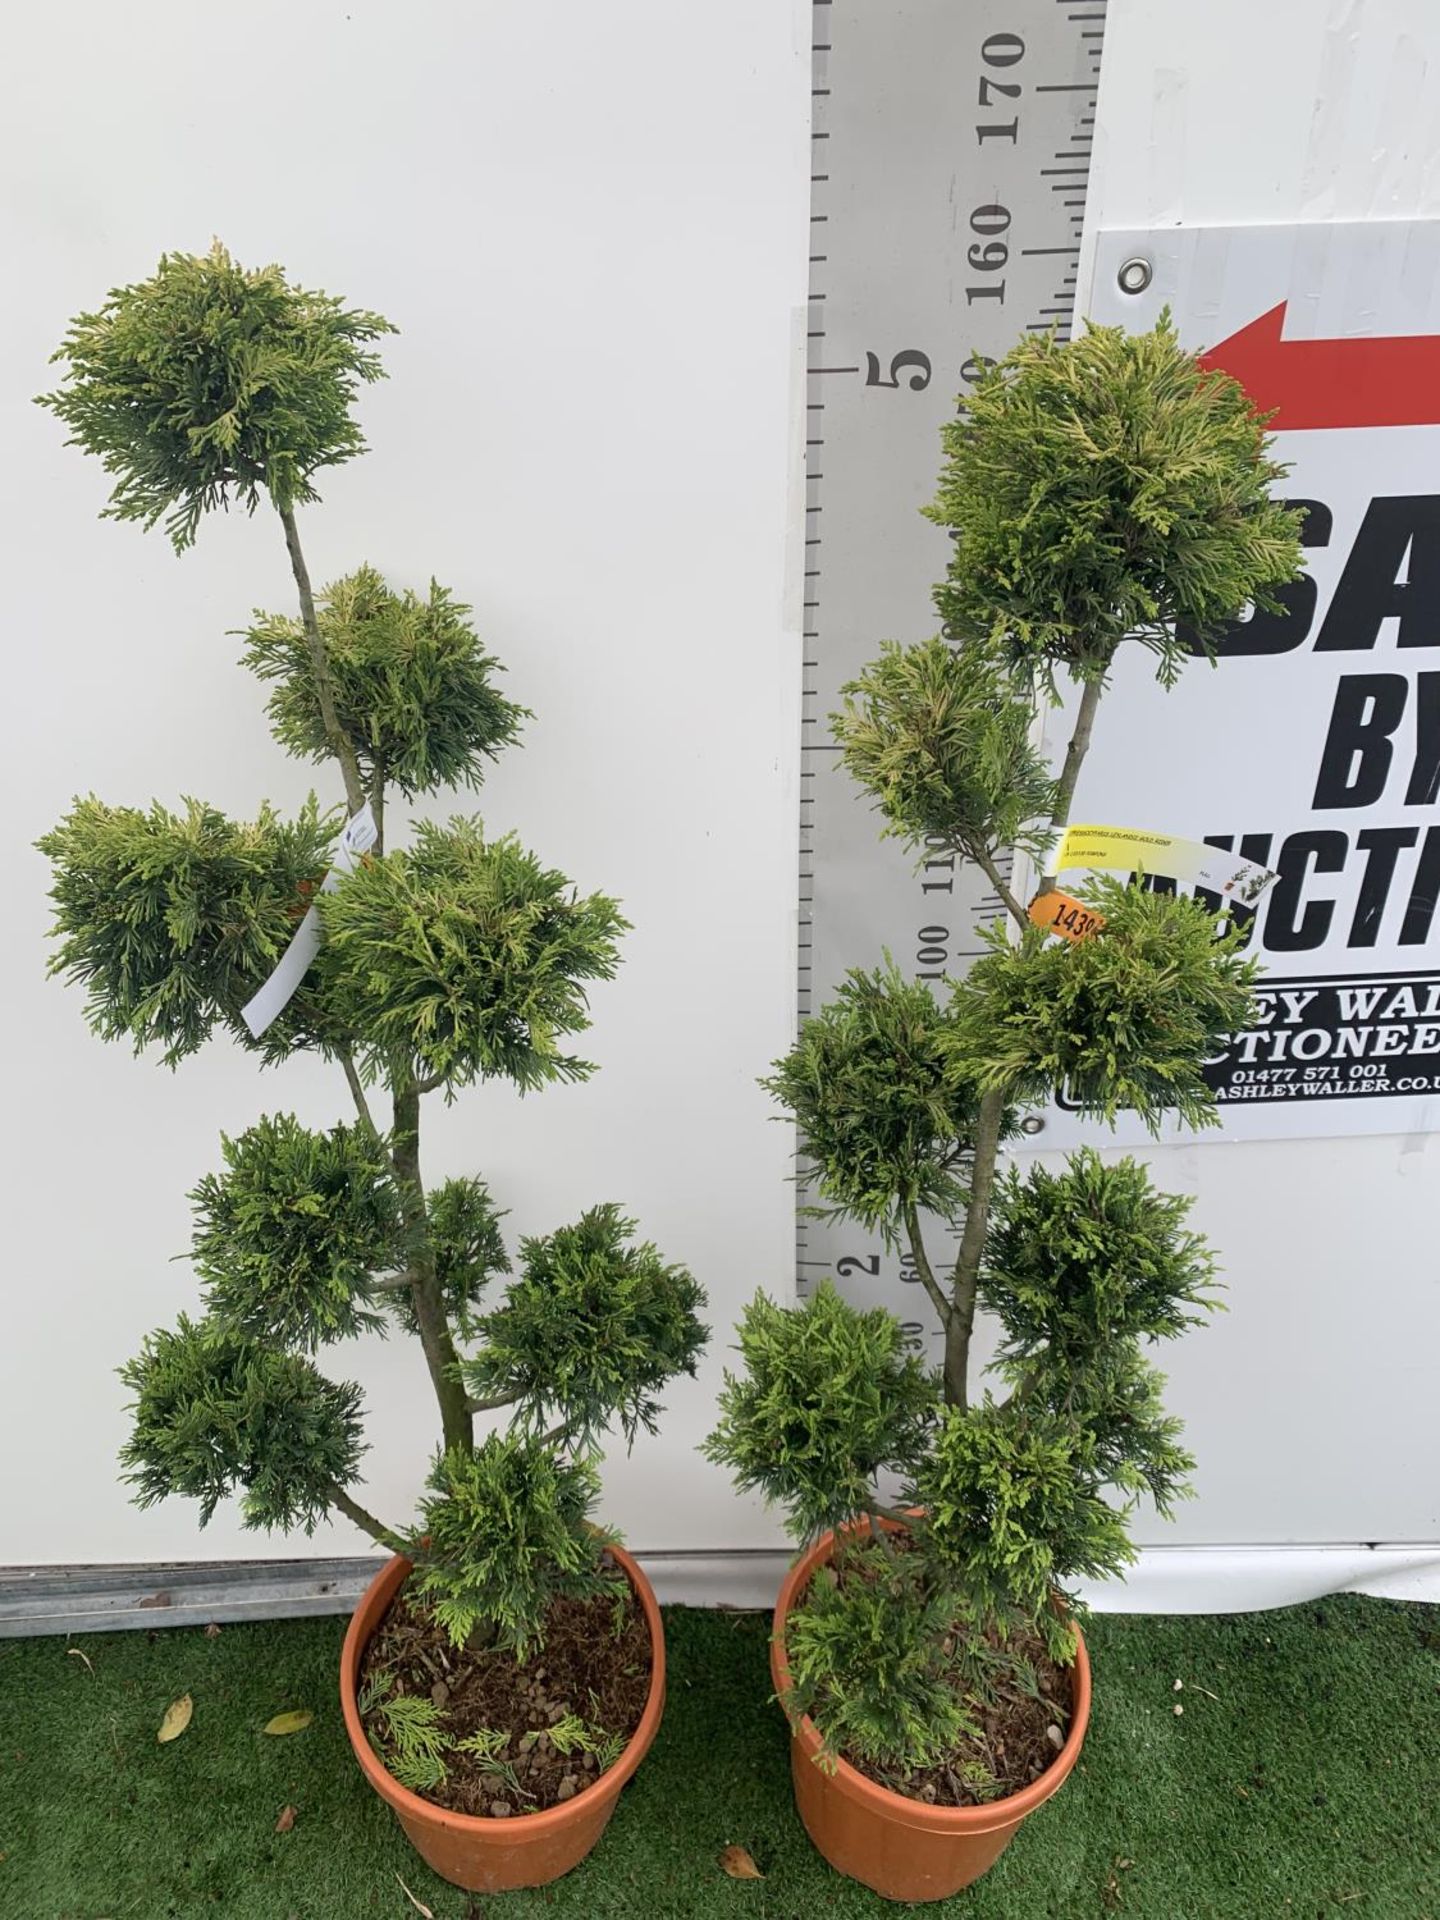 TWO POM POM TREES CUPRESSOCYPARIS LEYLANDII 'GOLD RIDER' APPROX 150CM IN HEIGHT IN 15 LTR POTS - Image 3 of 6